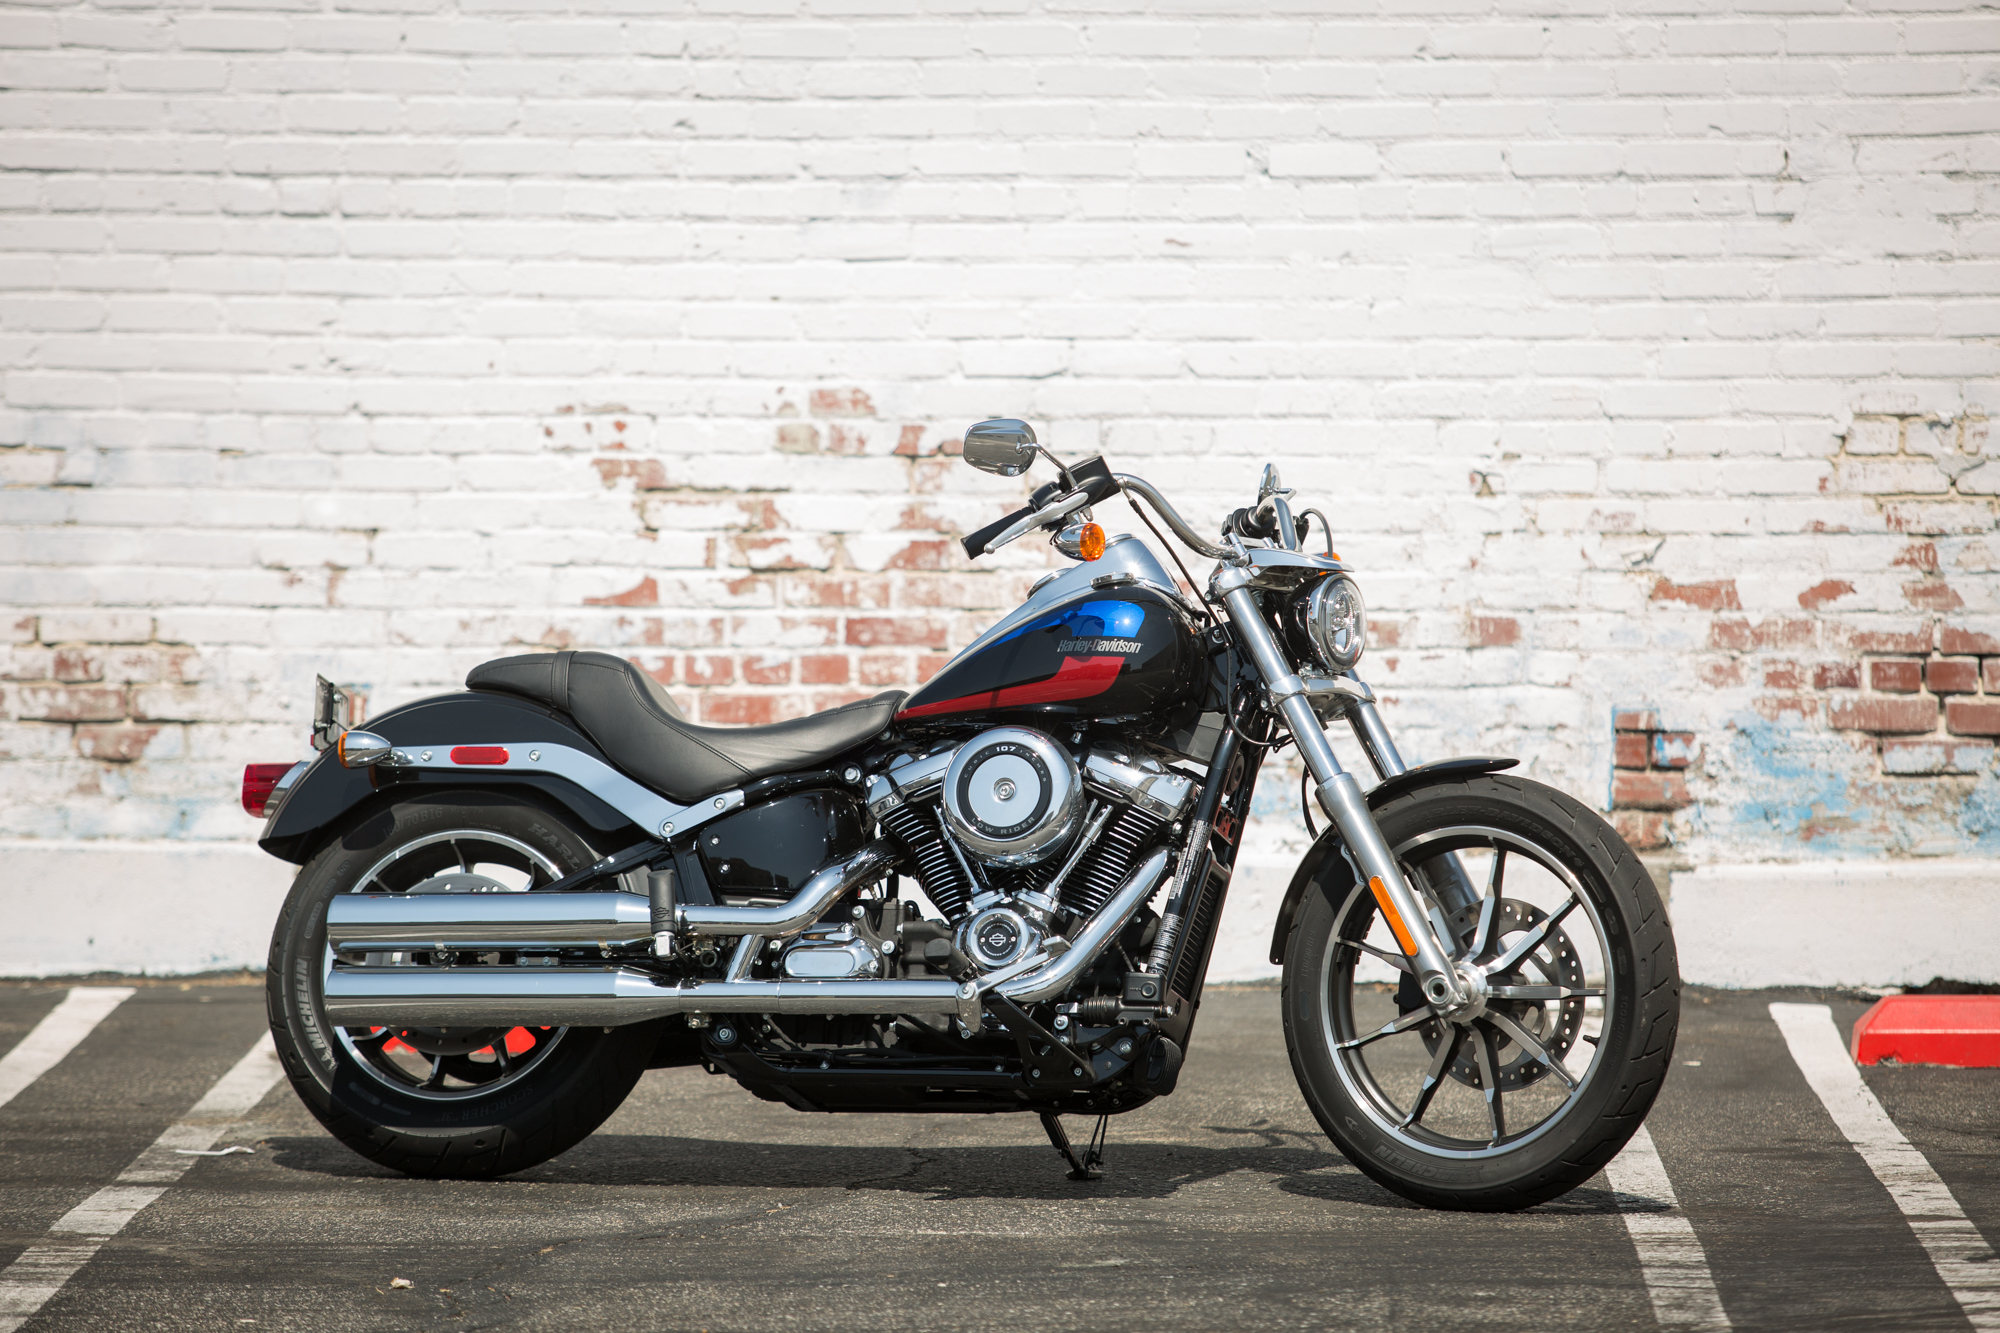 Review Of Harley Davidson Softail Low Rider 2018 Pictures Live Photos Description Harley Davidson Softail Low Rider 2018 Lovers Of Motorcycles